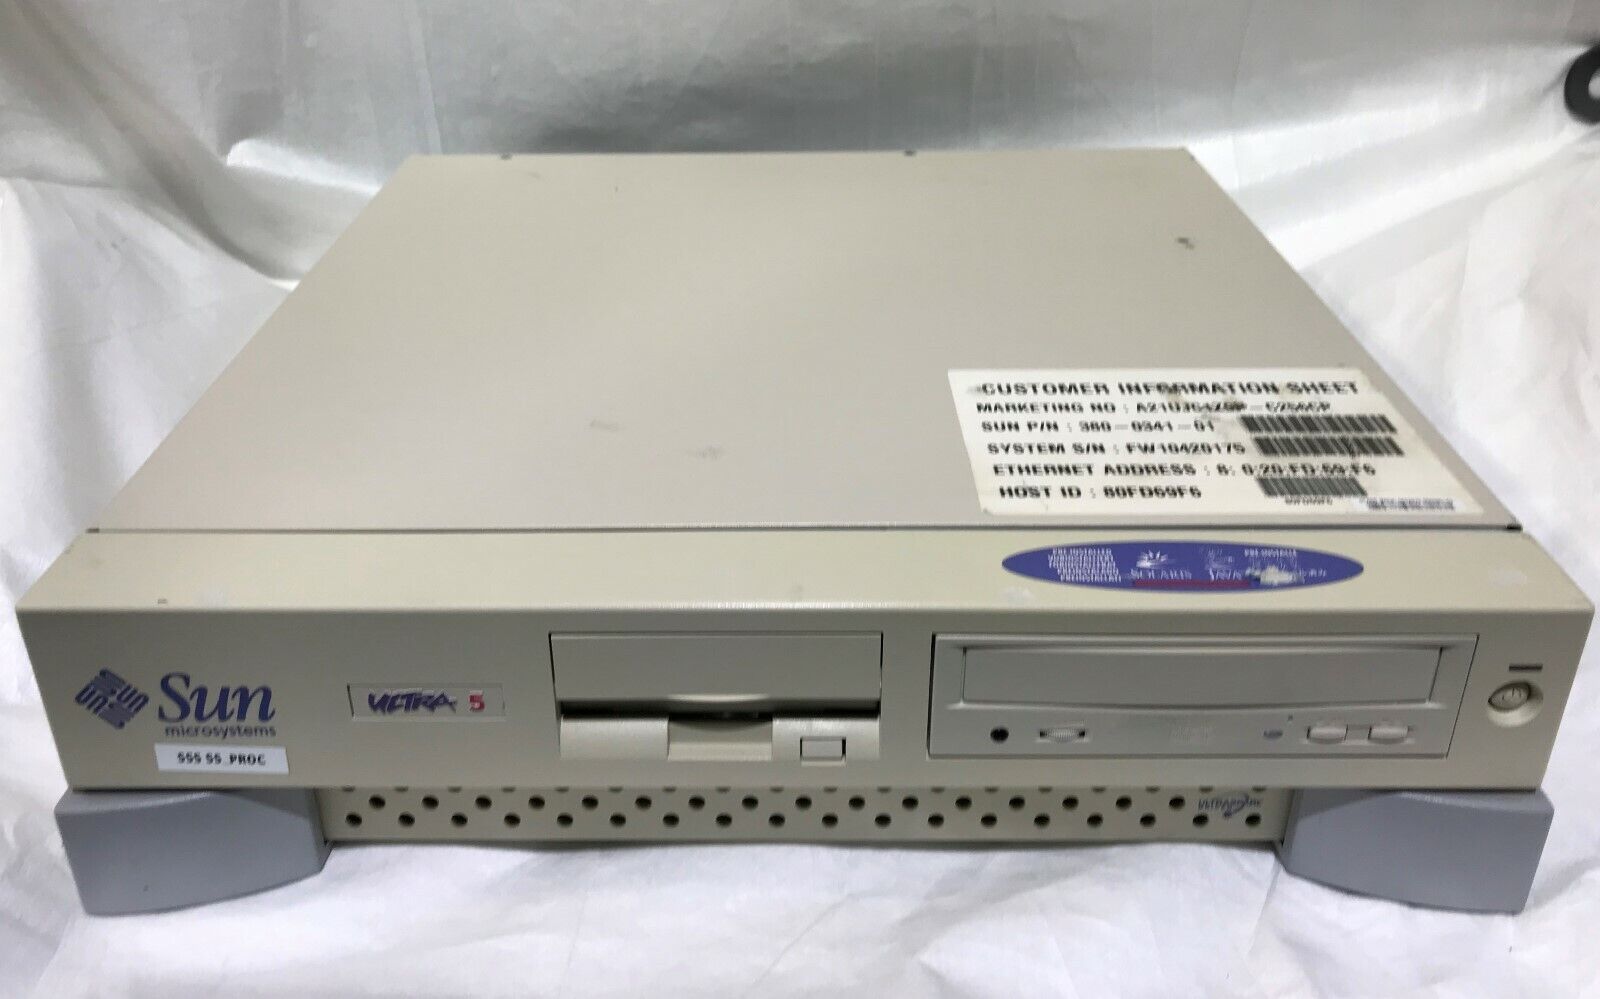 Sun Ultra 5, 360MHz, 256MB Memory, NO HDD, onboard graphics, CD-Rom Ultra 5